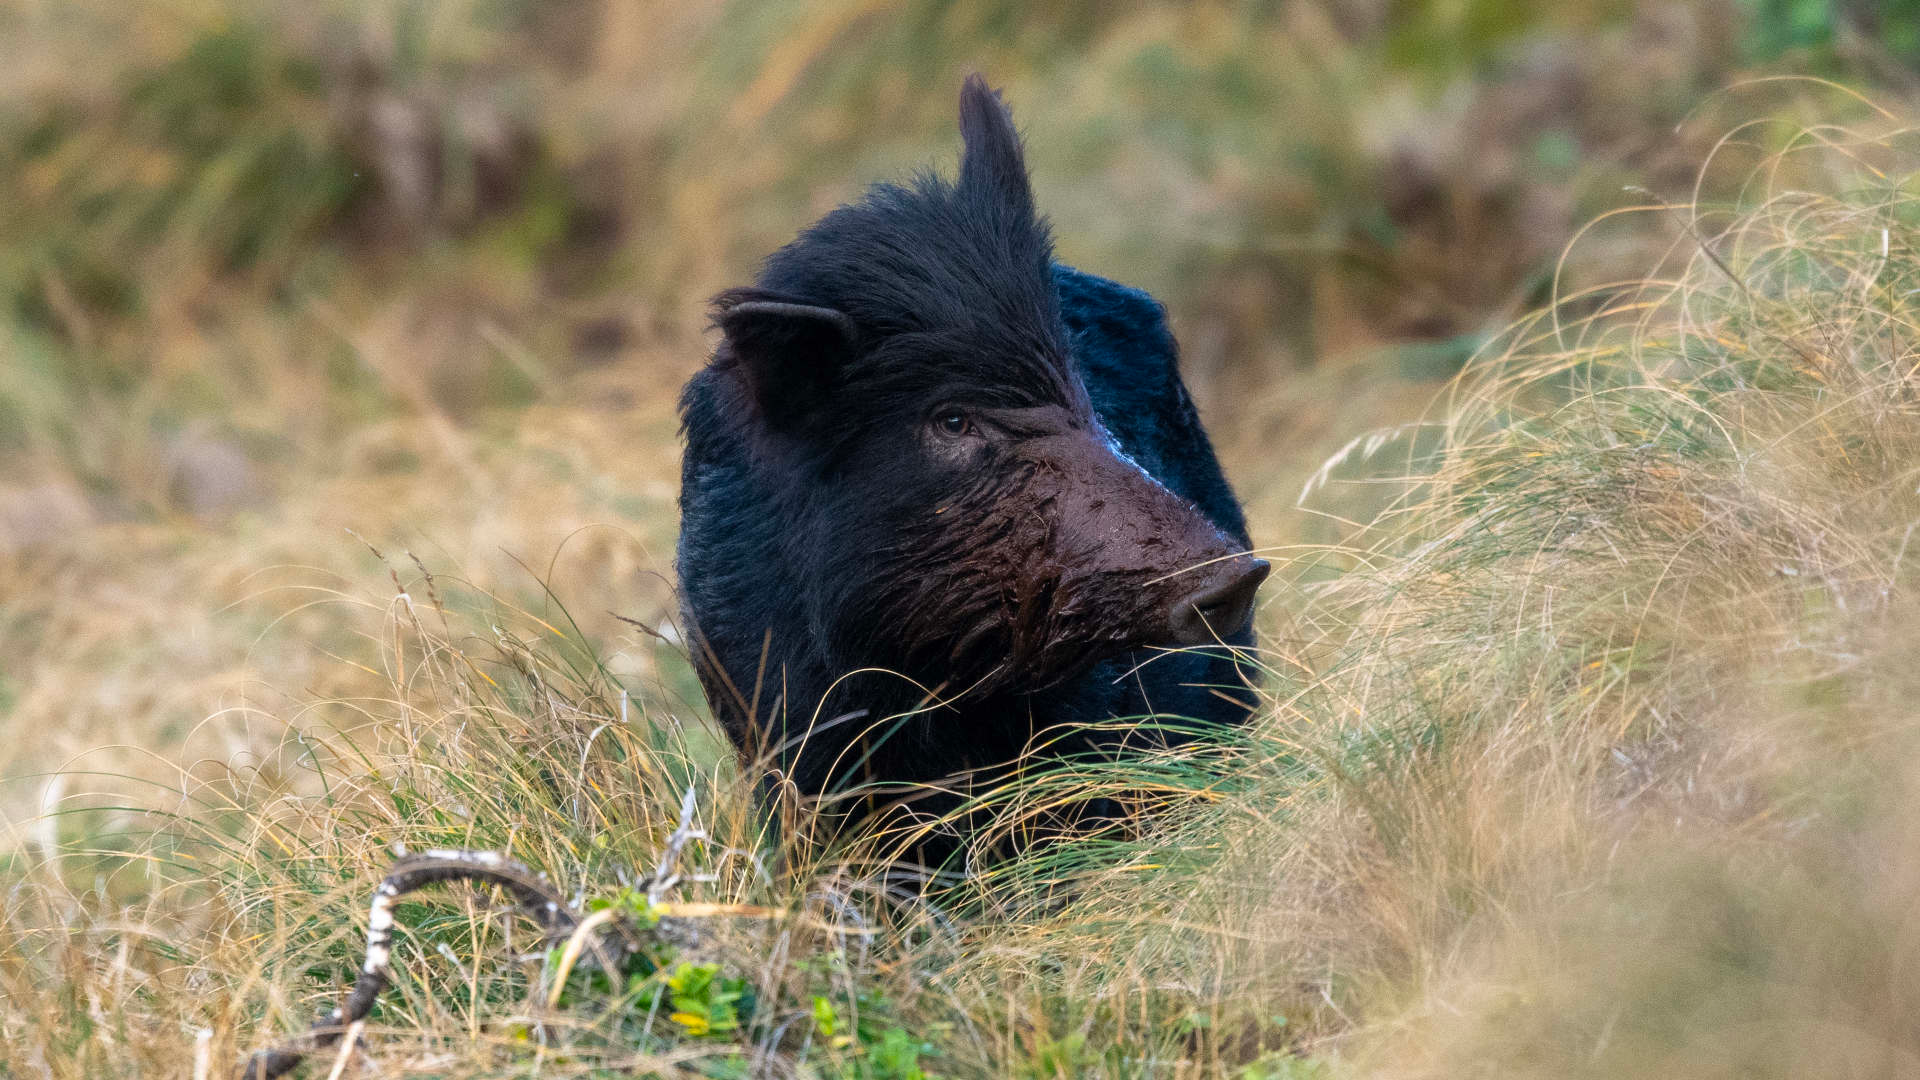 New Zealand’s wild pigs could be a source of much-needed donor organs